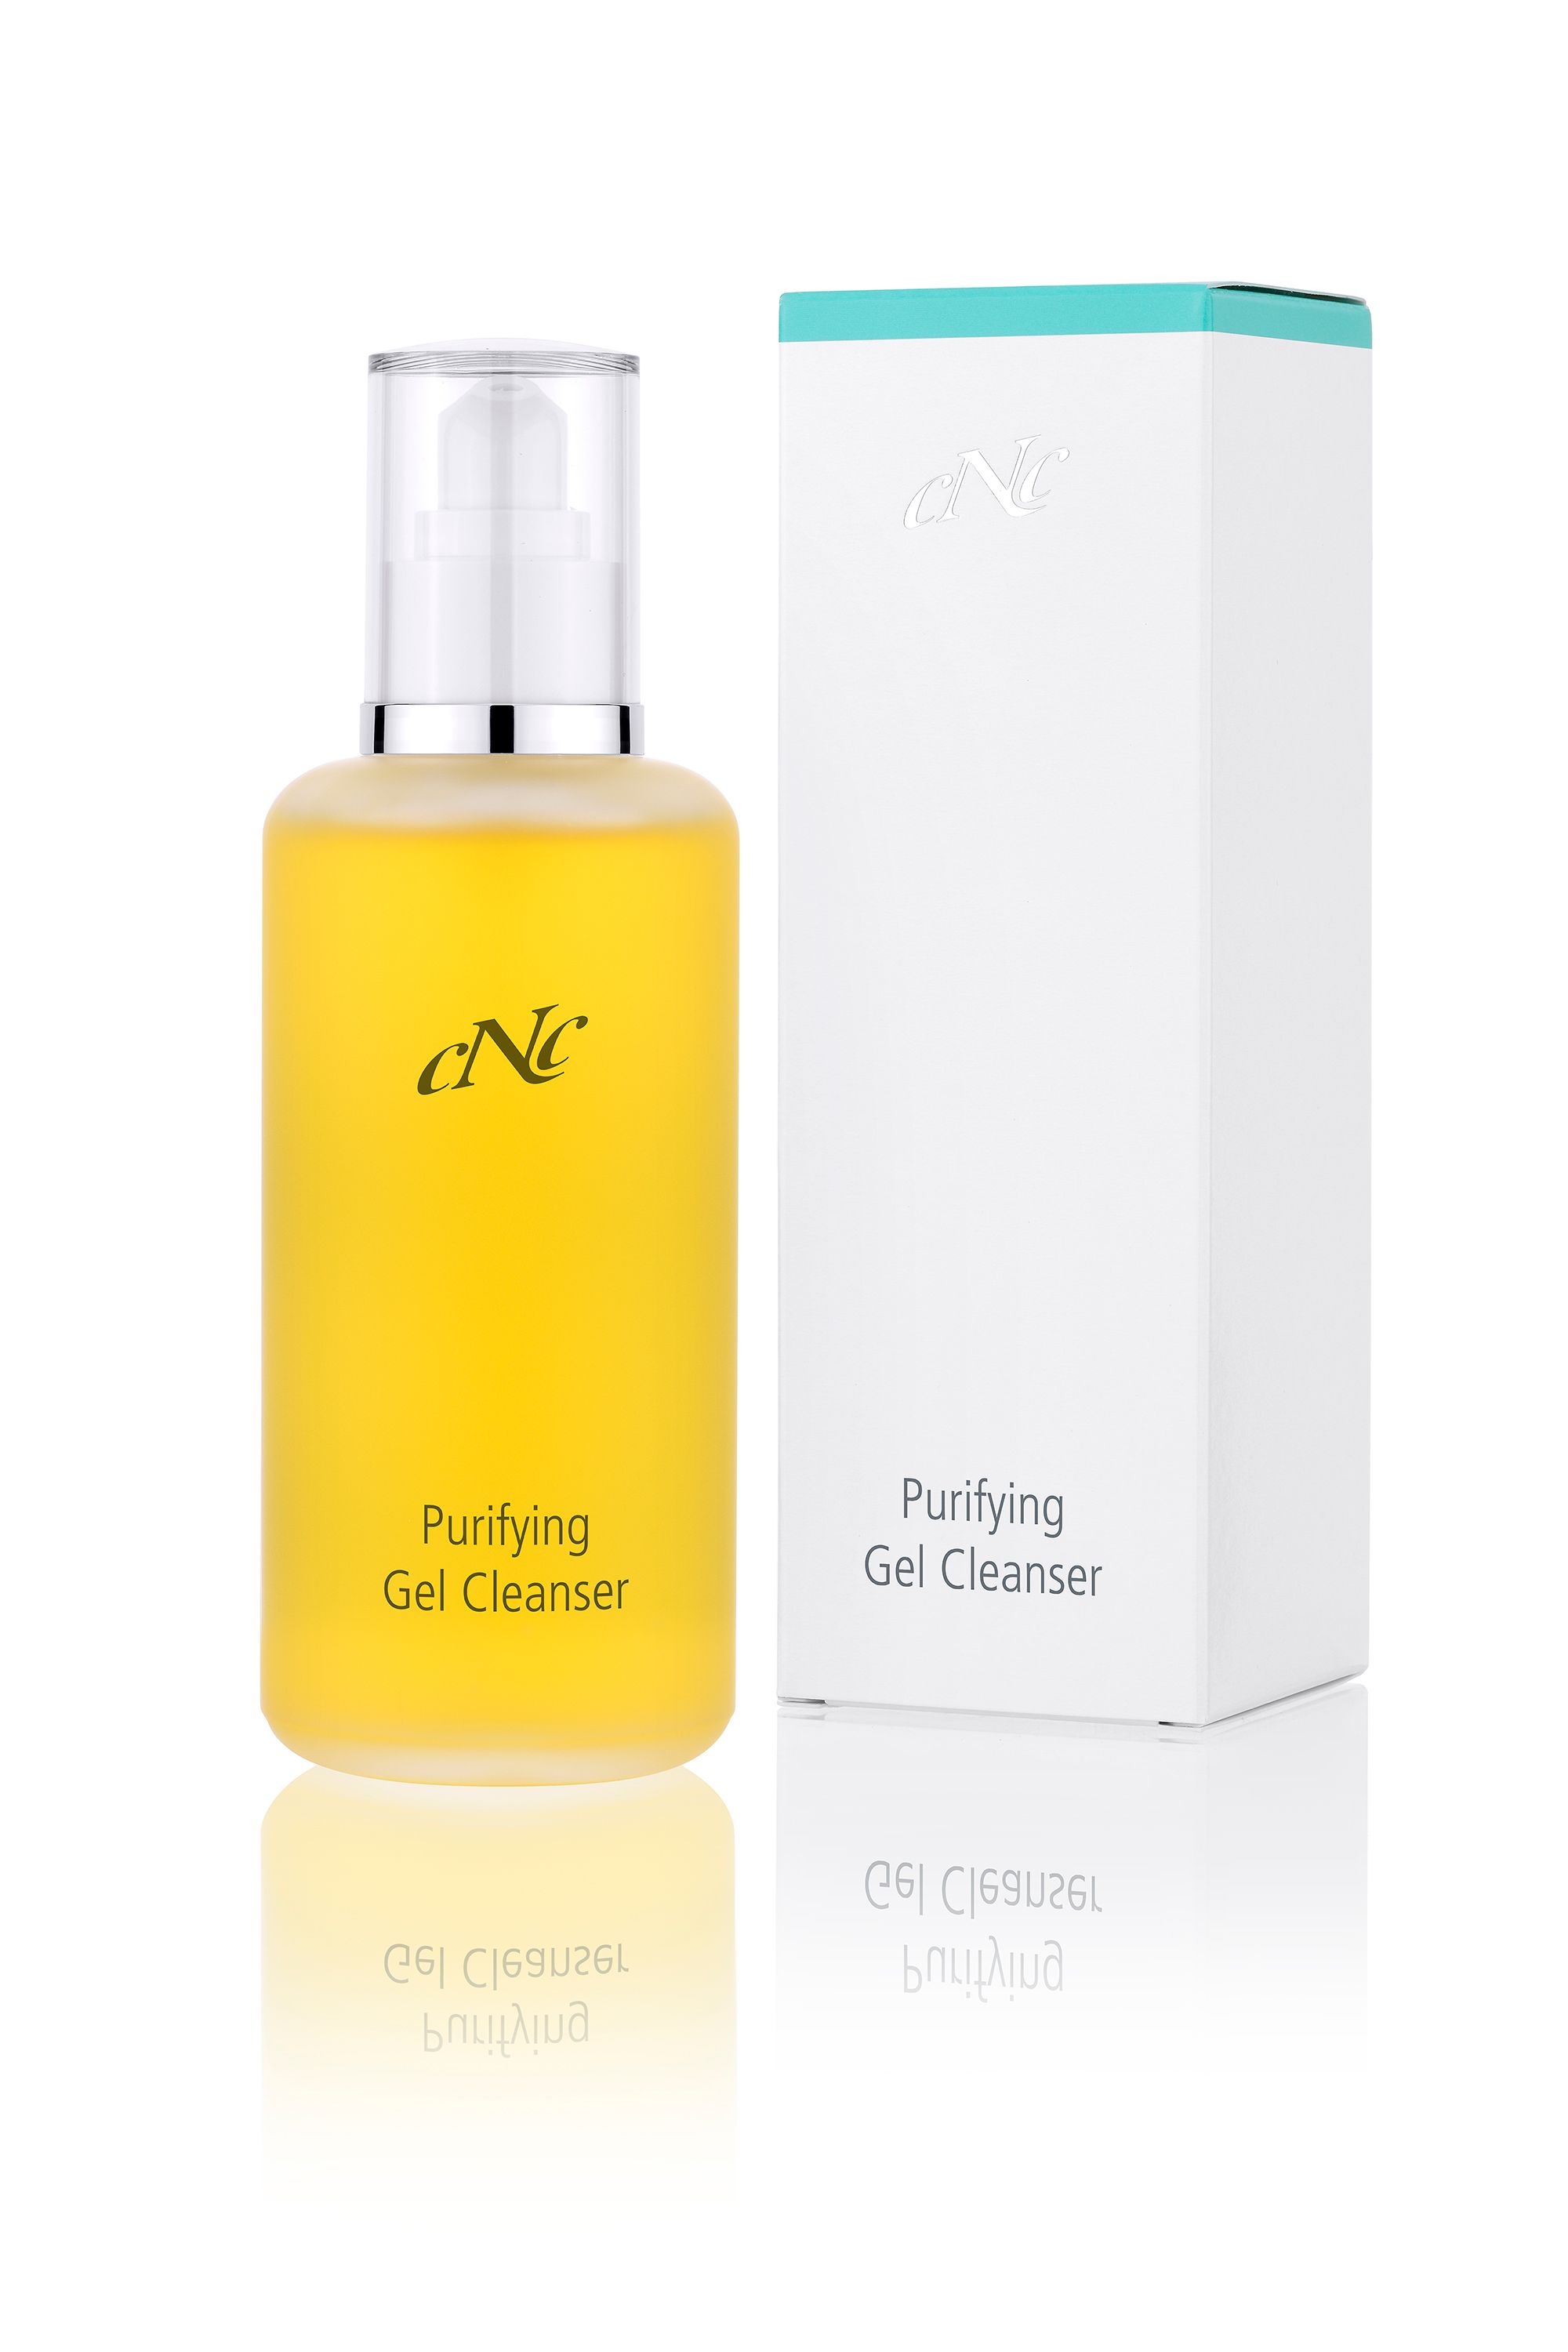 CNC Cosmetic aesthetic pharm Purifying Gel Cleanser